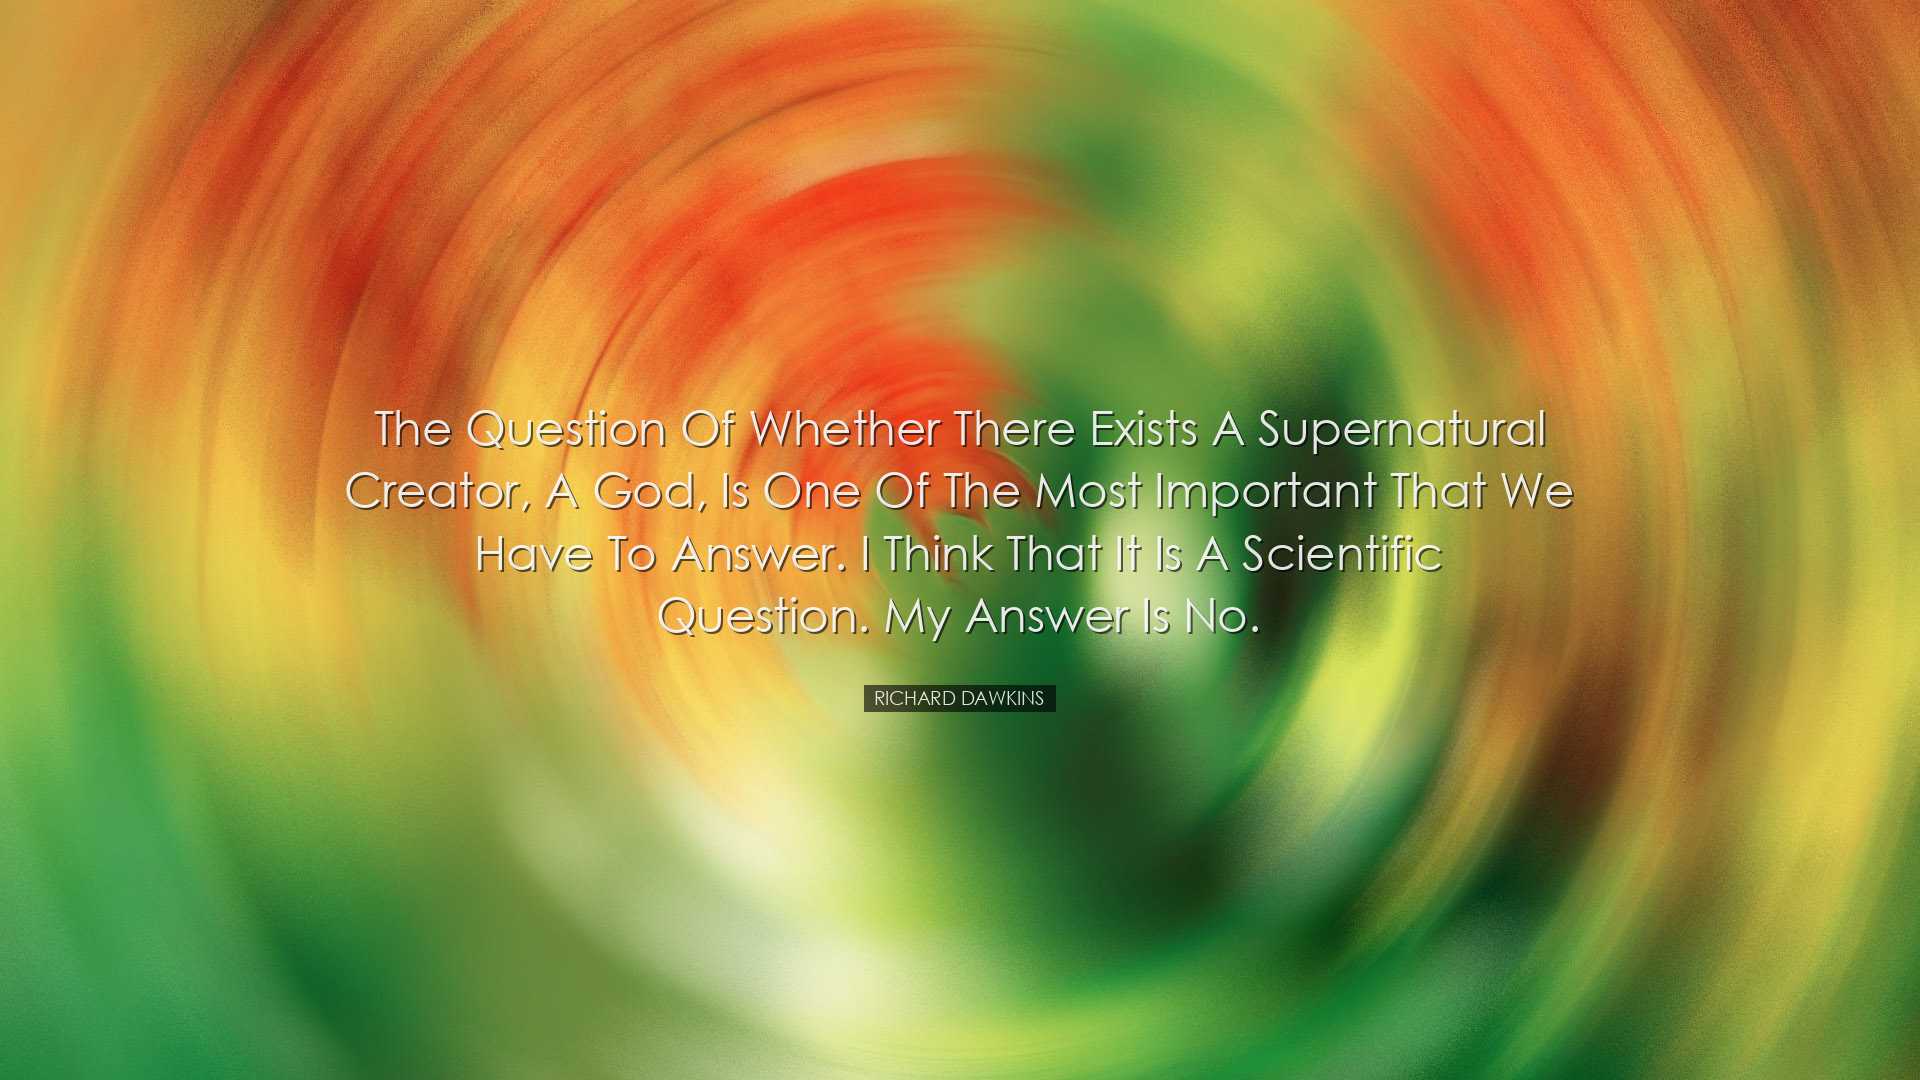 The question of whether there exists a supernatural creator, a God